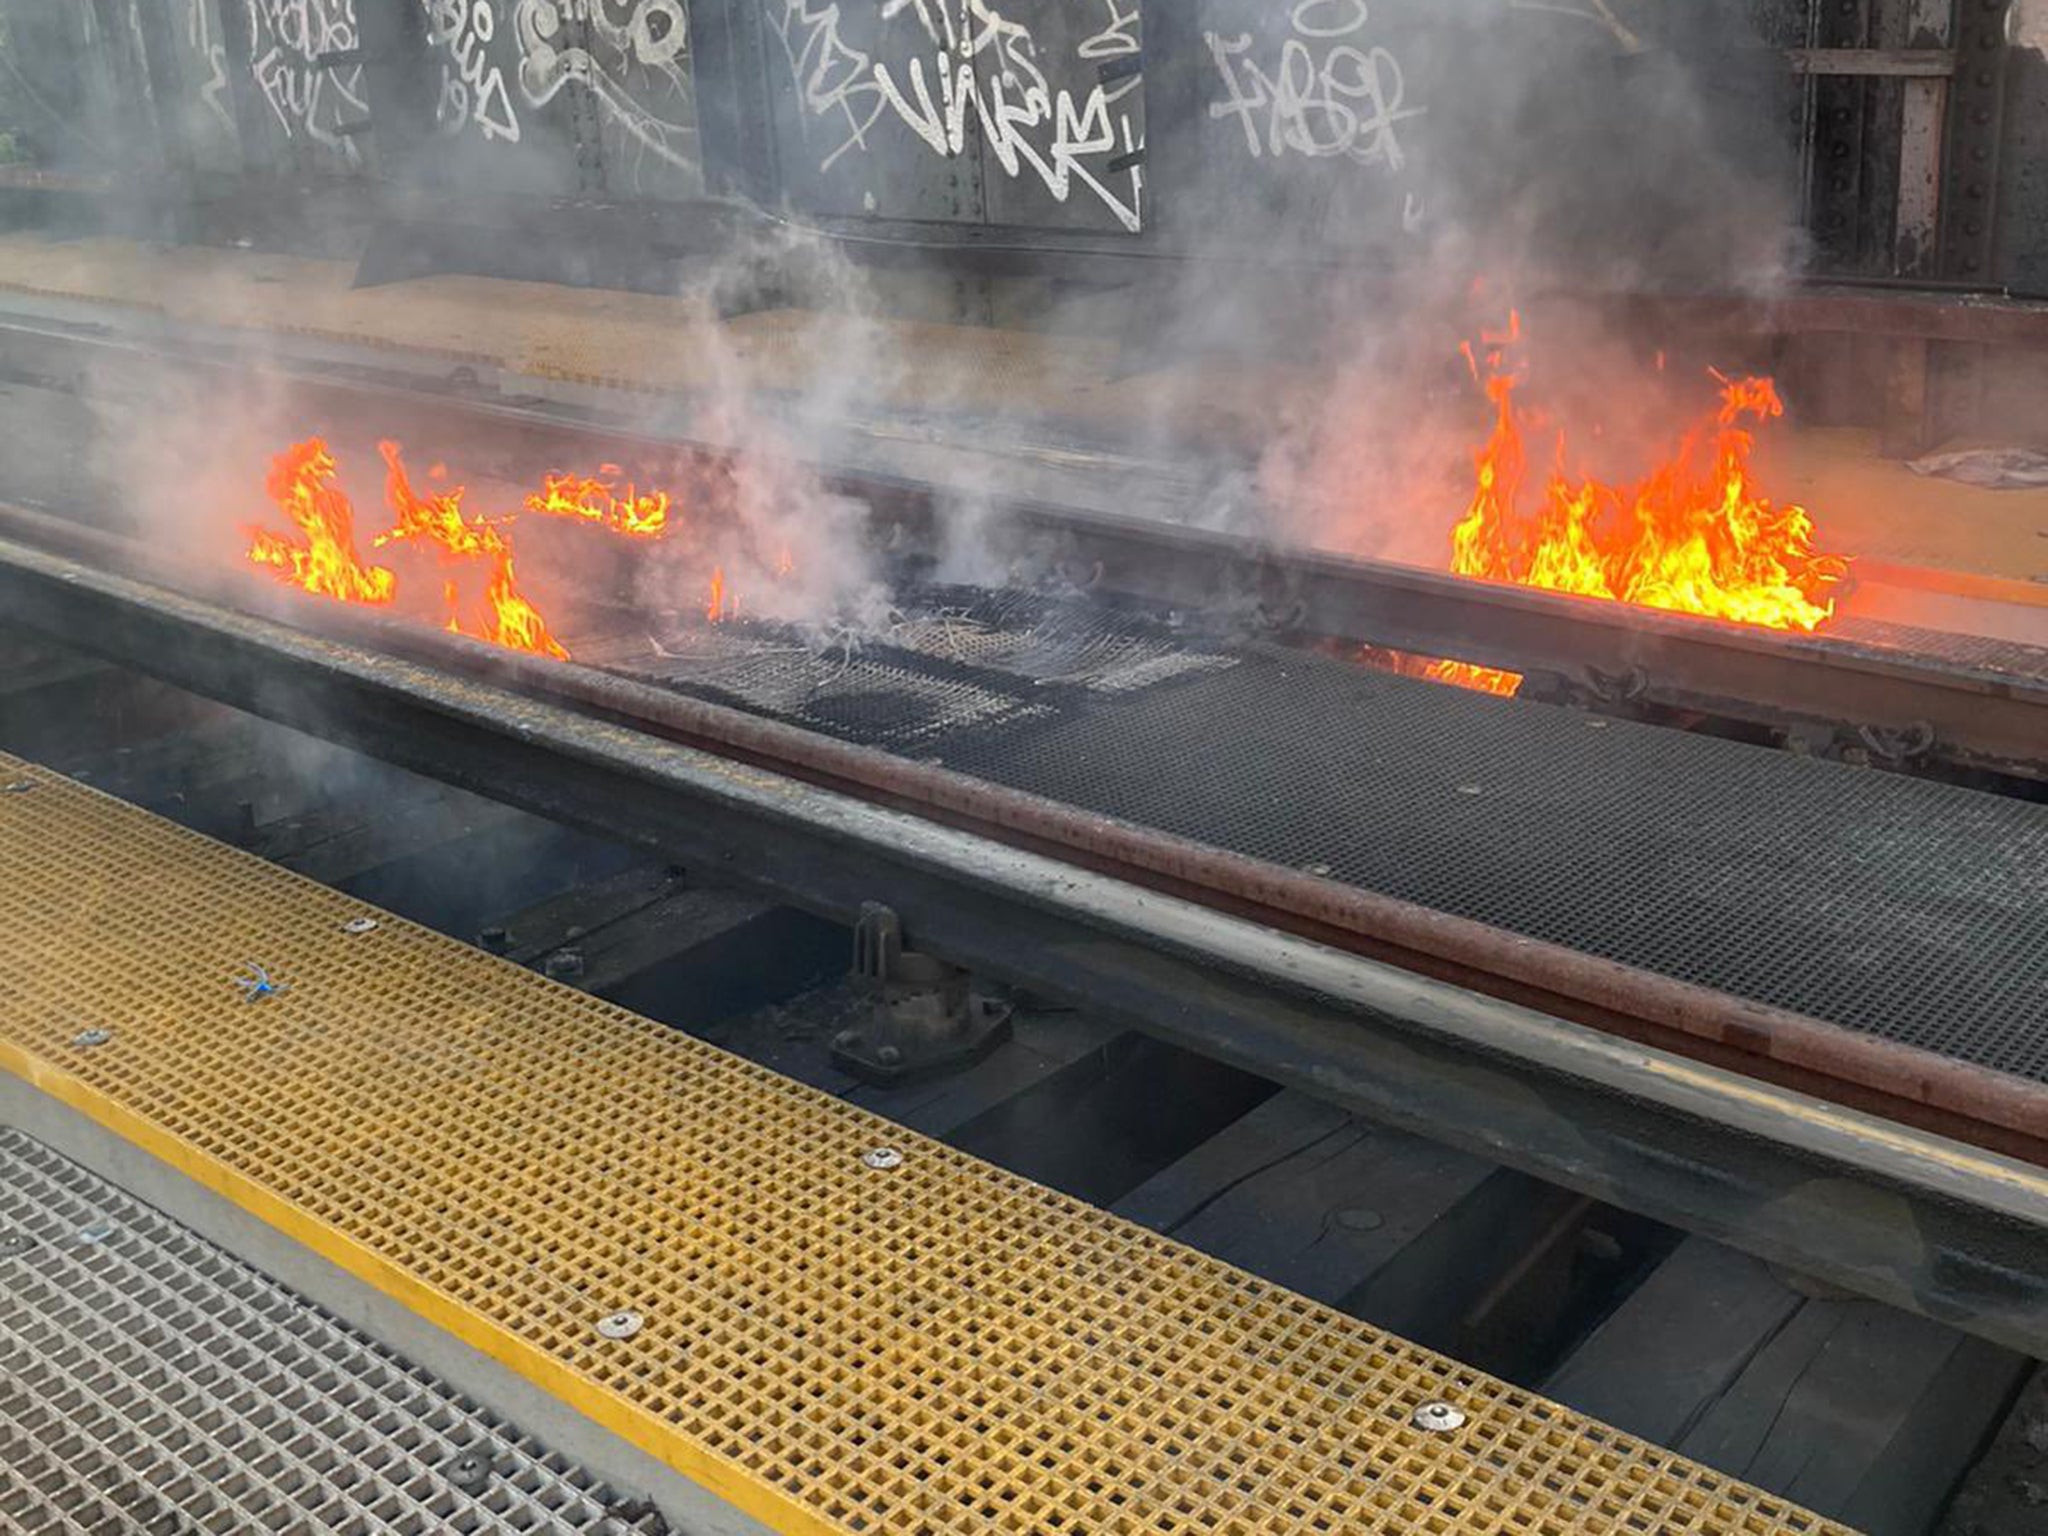 The heat in London caused train tracks to catch fire on Monday